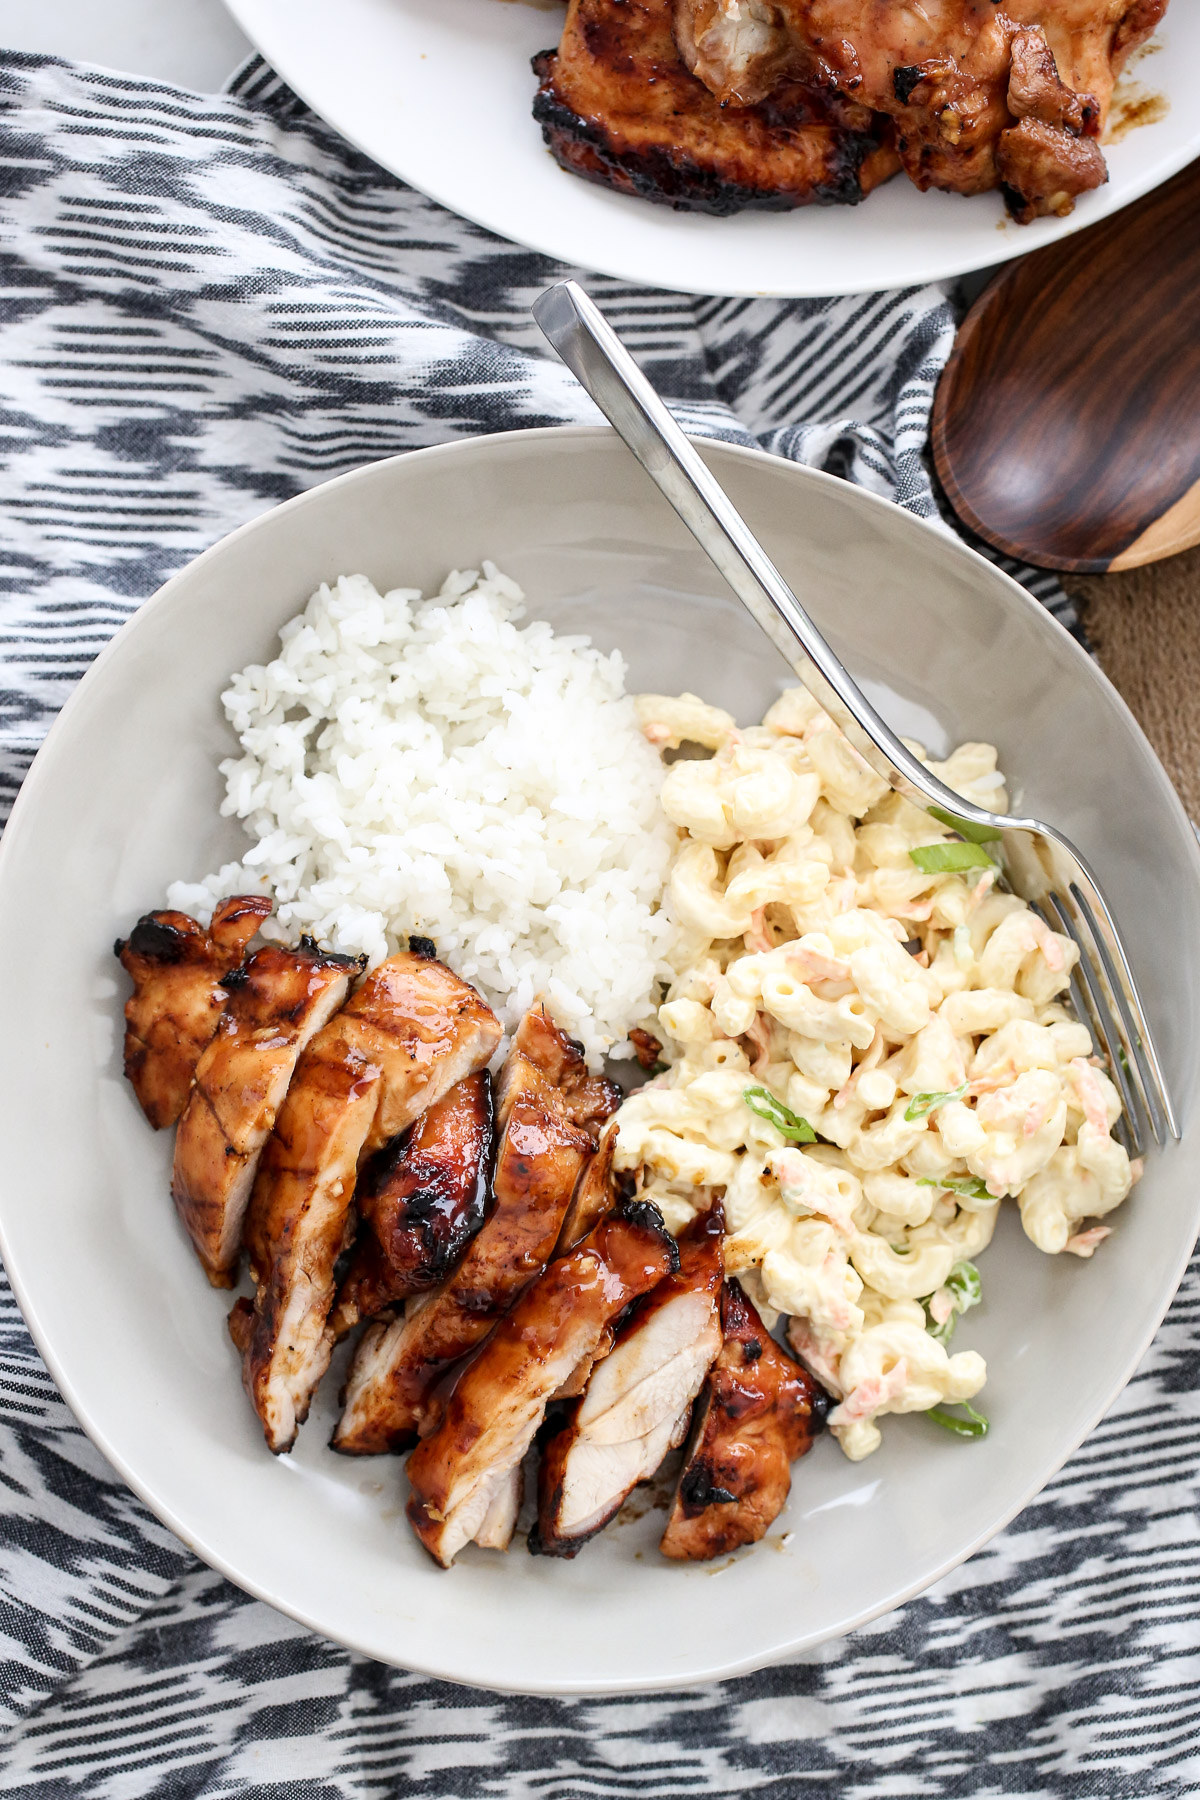 Grilled chicken, white rice, and macaroni salad.